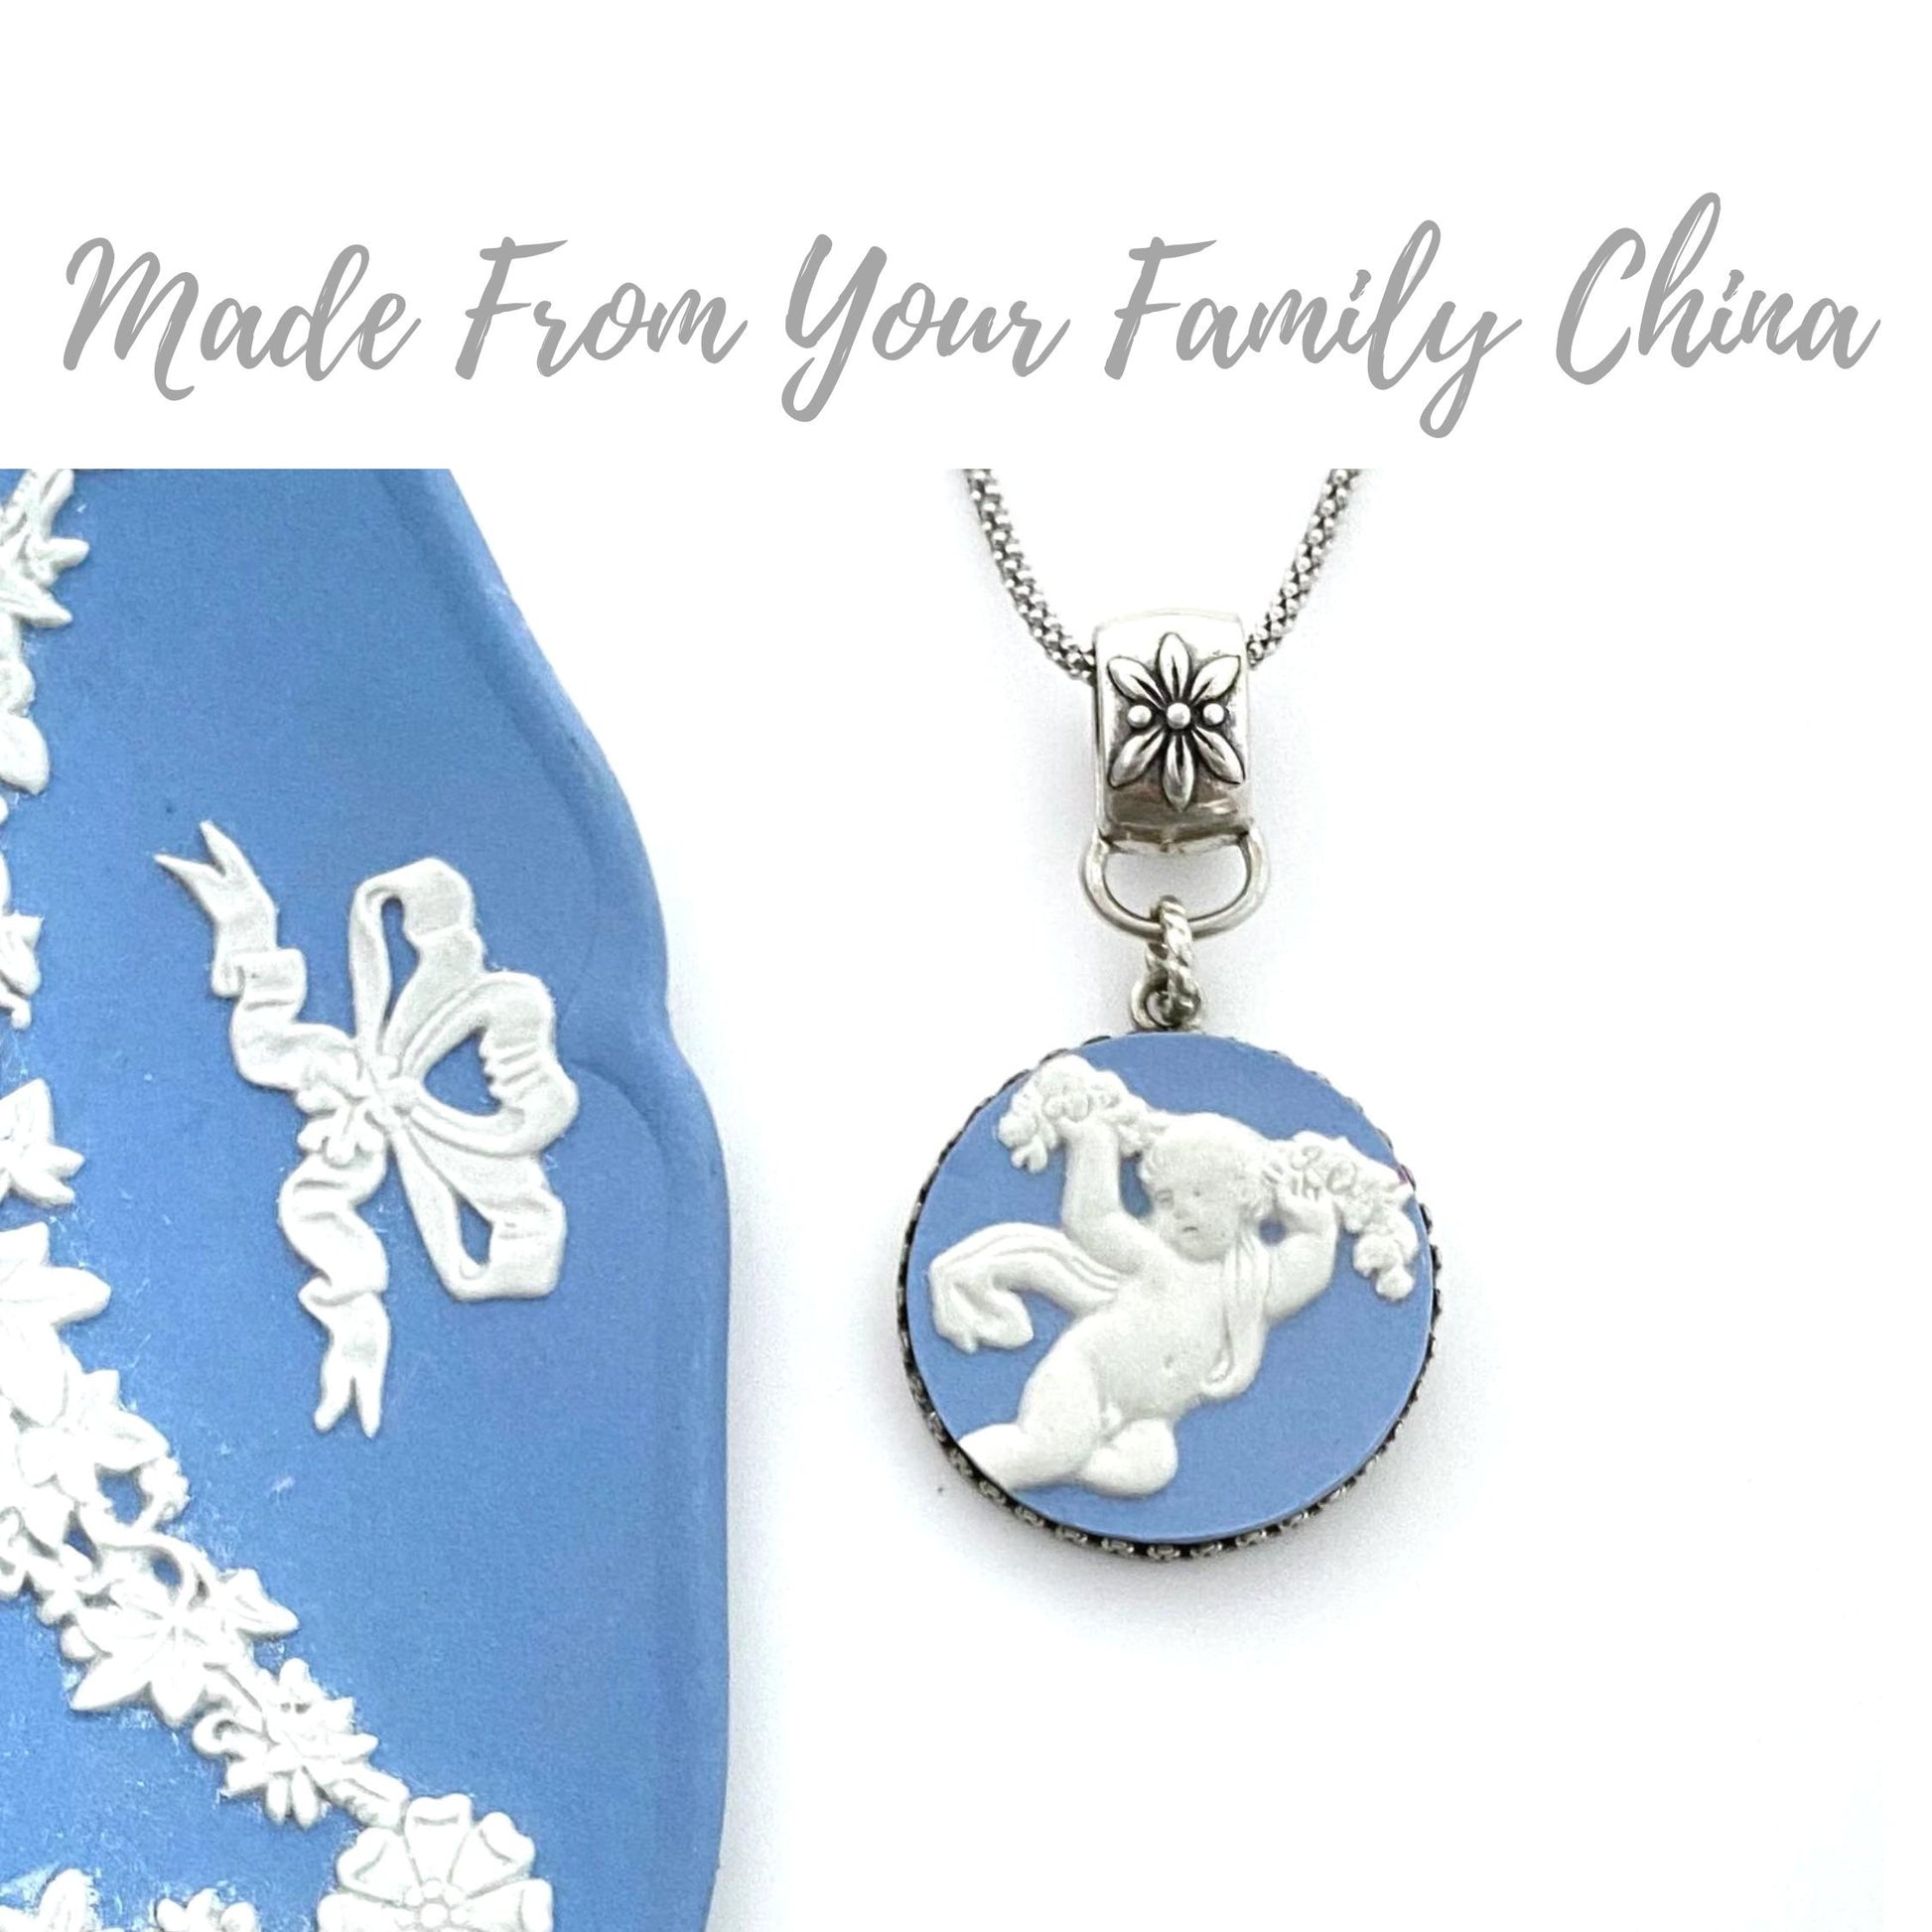 CUSTOM ORDER Large Round China Necklace, Made From Your Family China, Broken China Jewelry, Custom Jewelry, Remembrance Jewelry